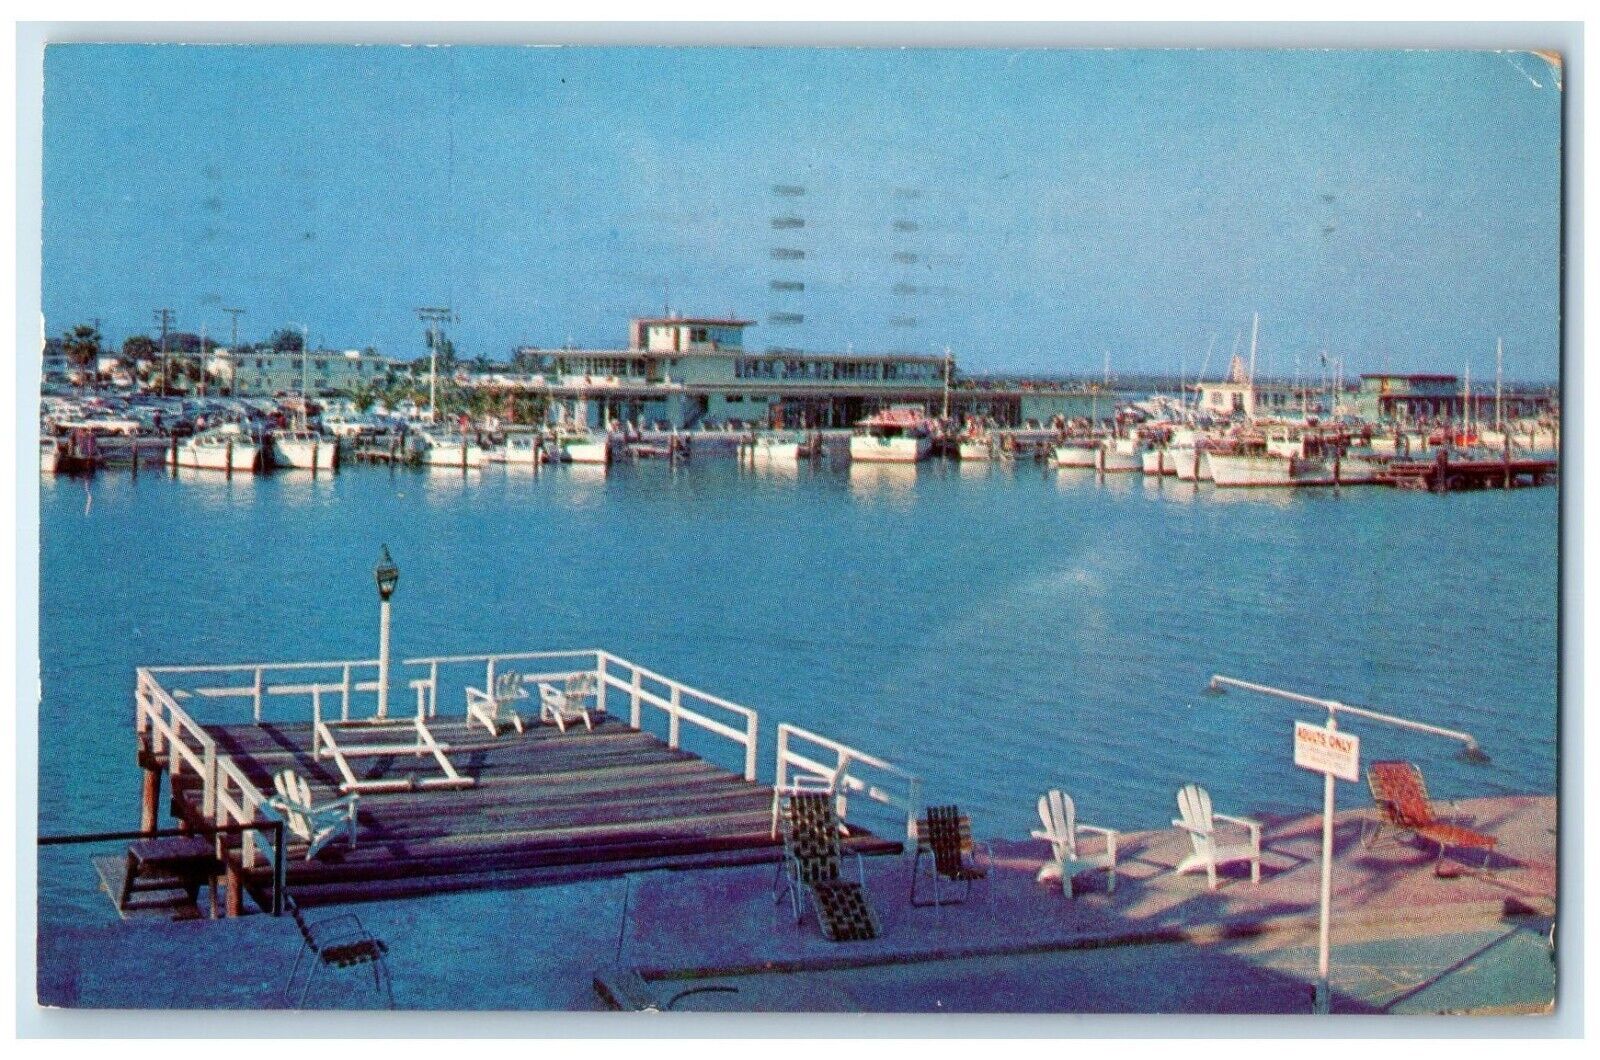 1959 View Of Marina Boats Clearwater Beach Florida FL Posted Vintage Postcard